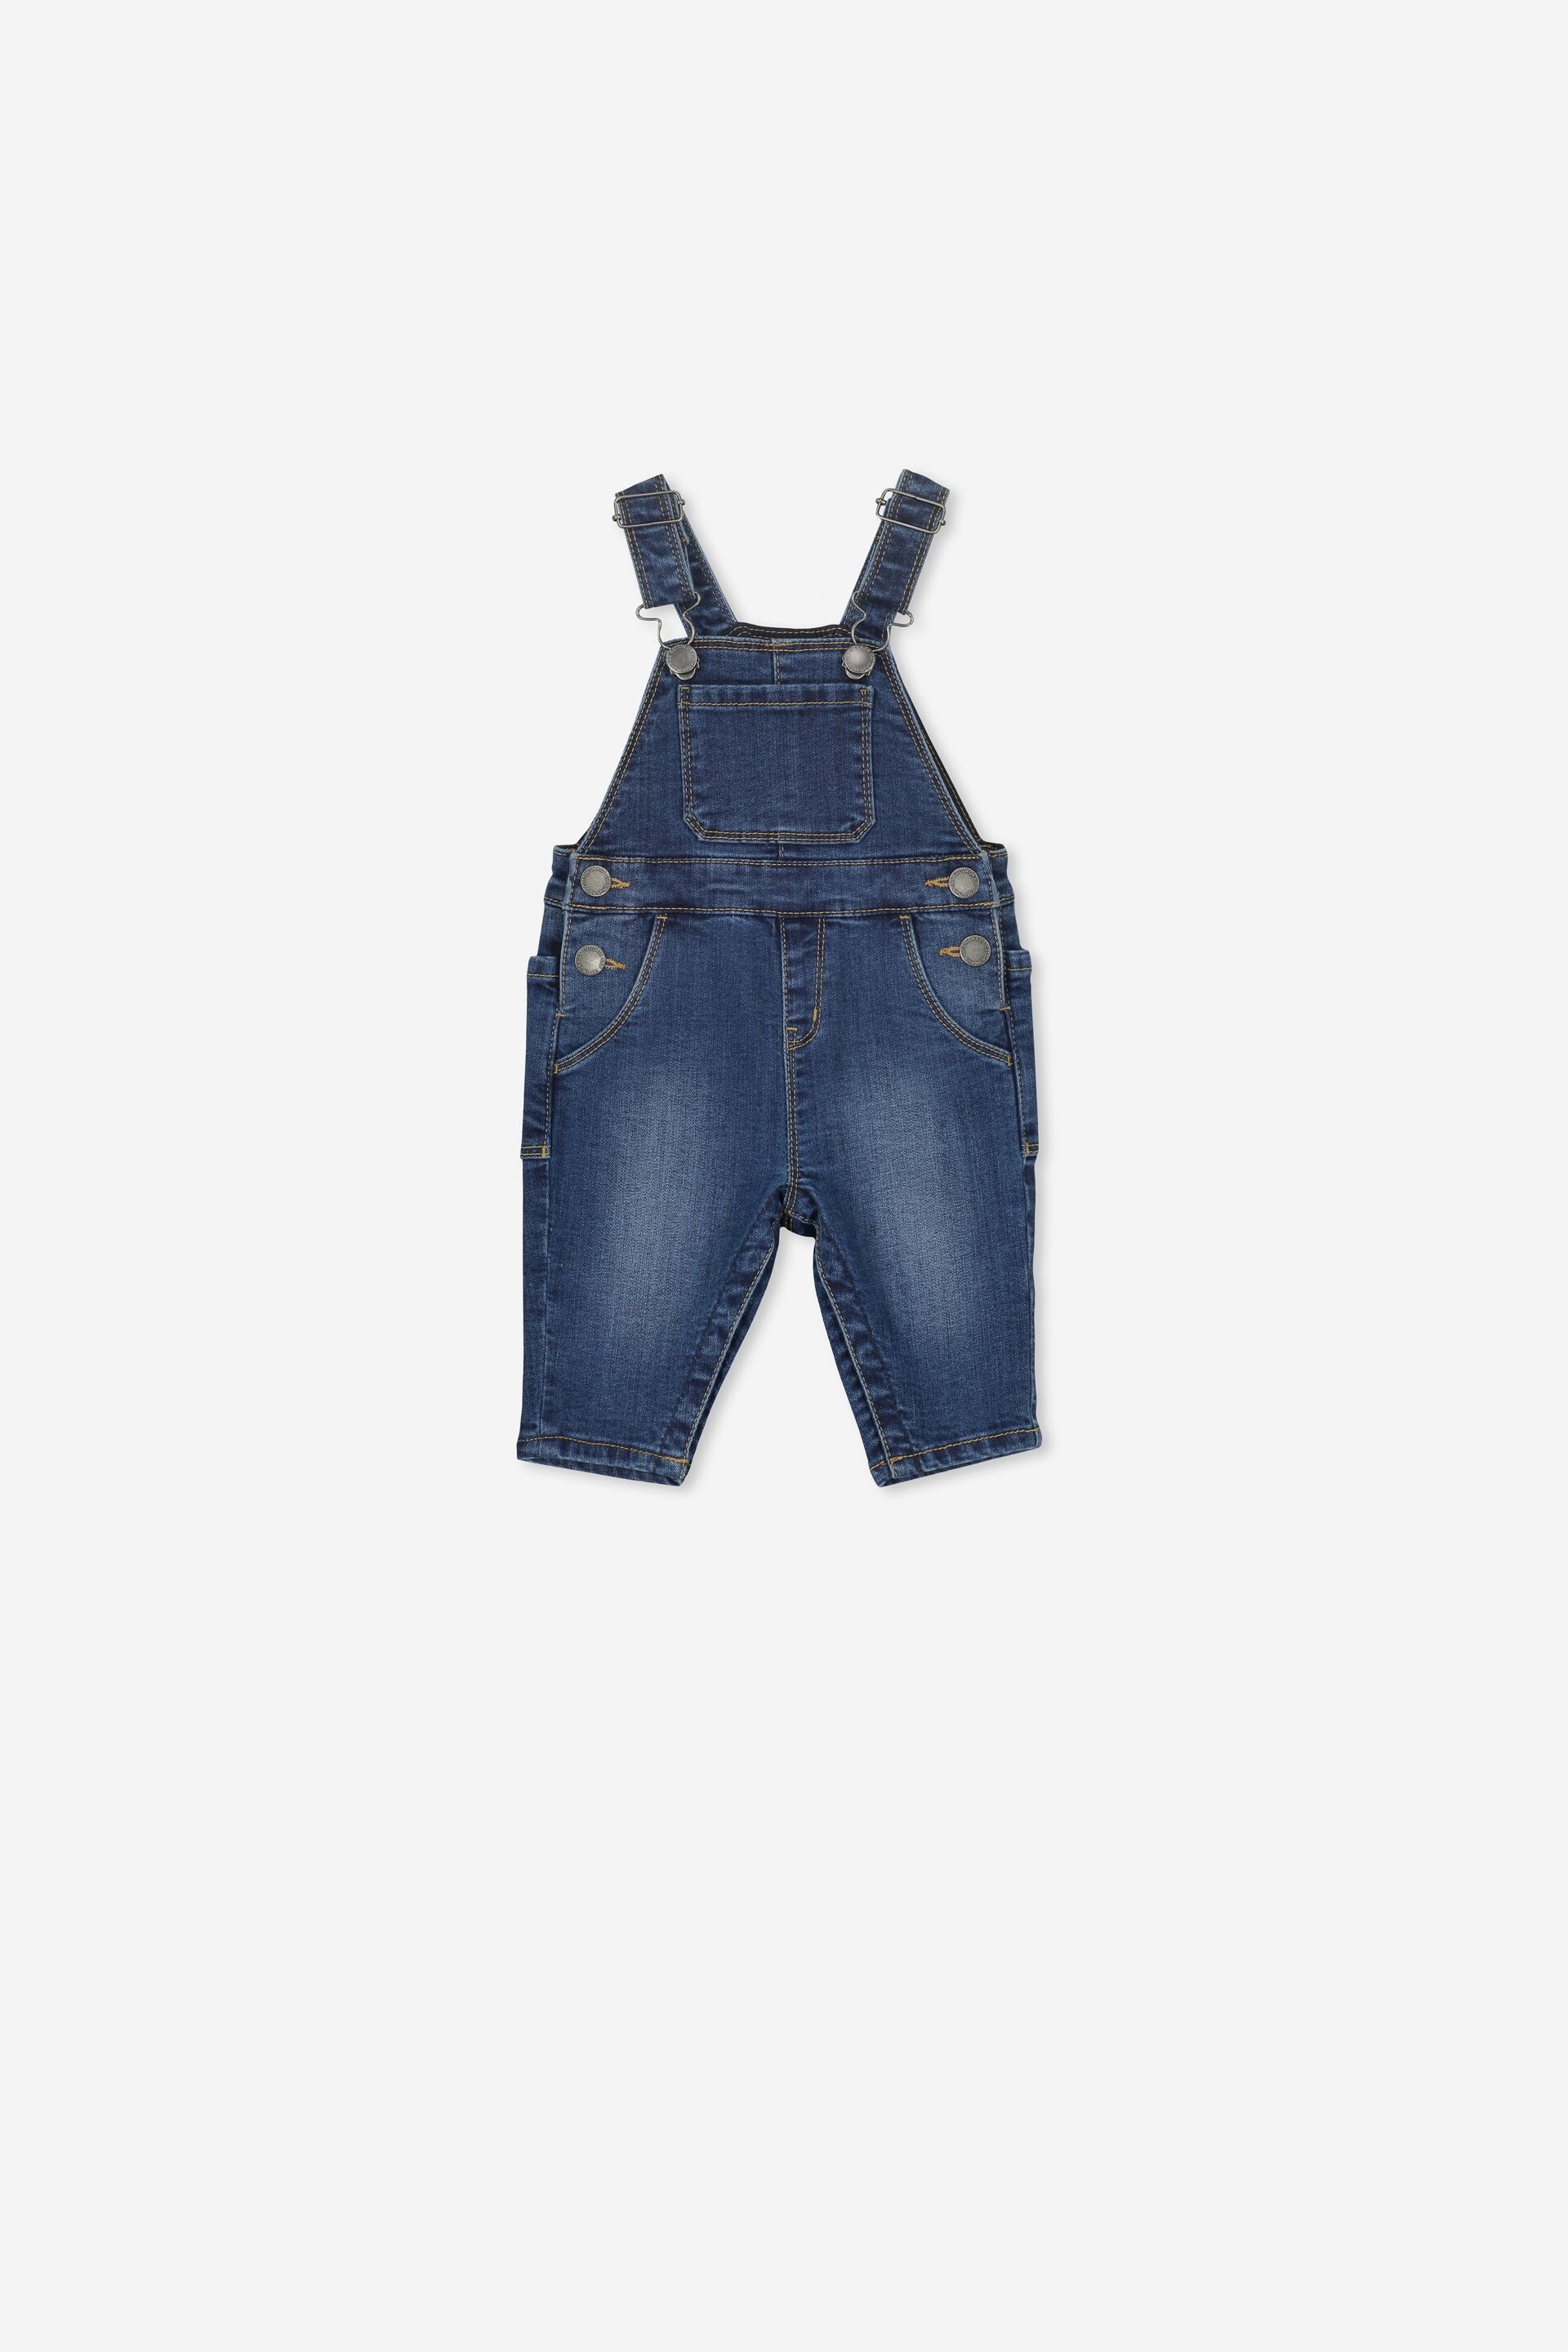 jeans dungarees for baby boy